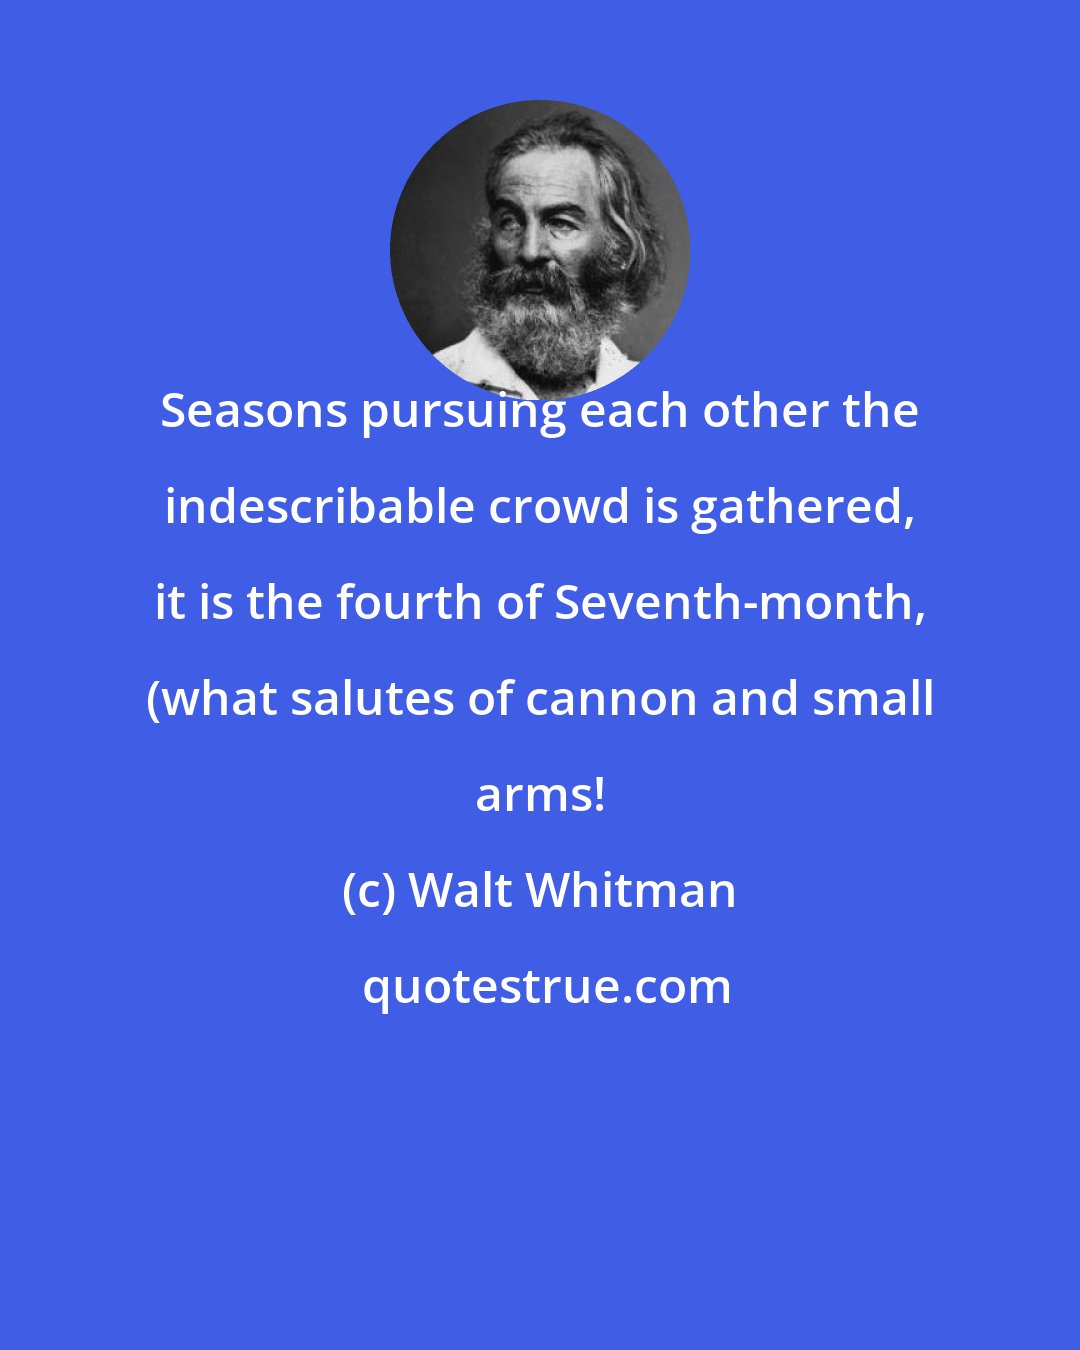 Walt Whitman: Seasons pursuing each other the indescribable crowd is gathered, it is the fourth of Seventh-month, (what salutes of cannon and small arms!